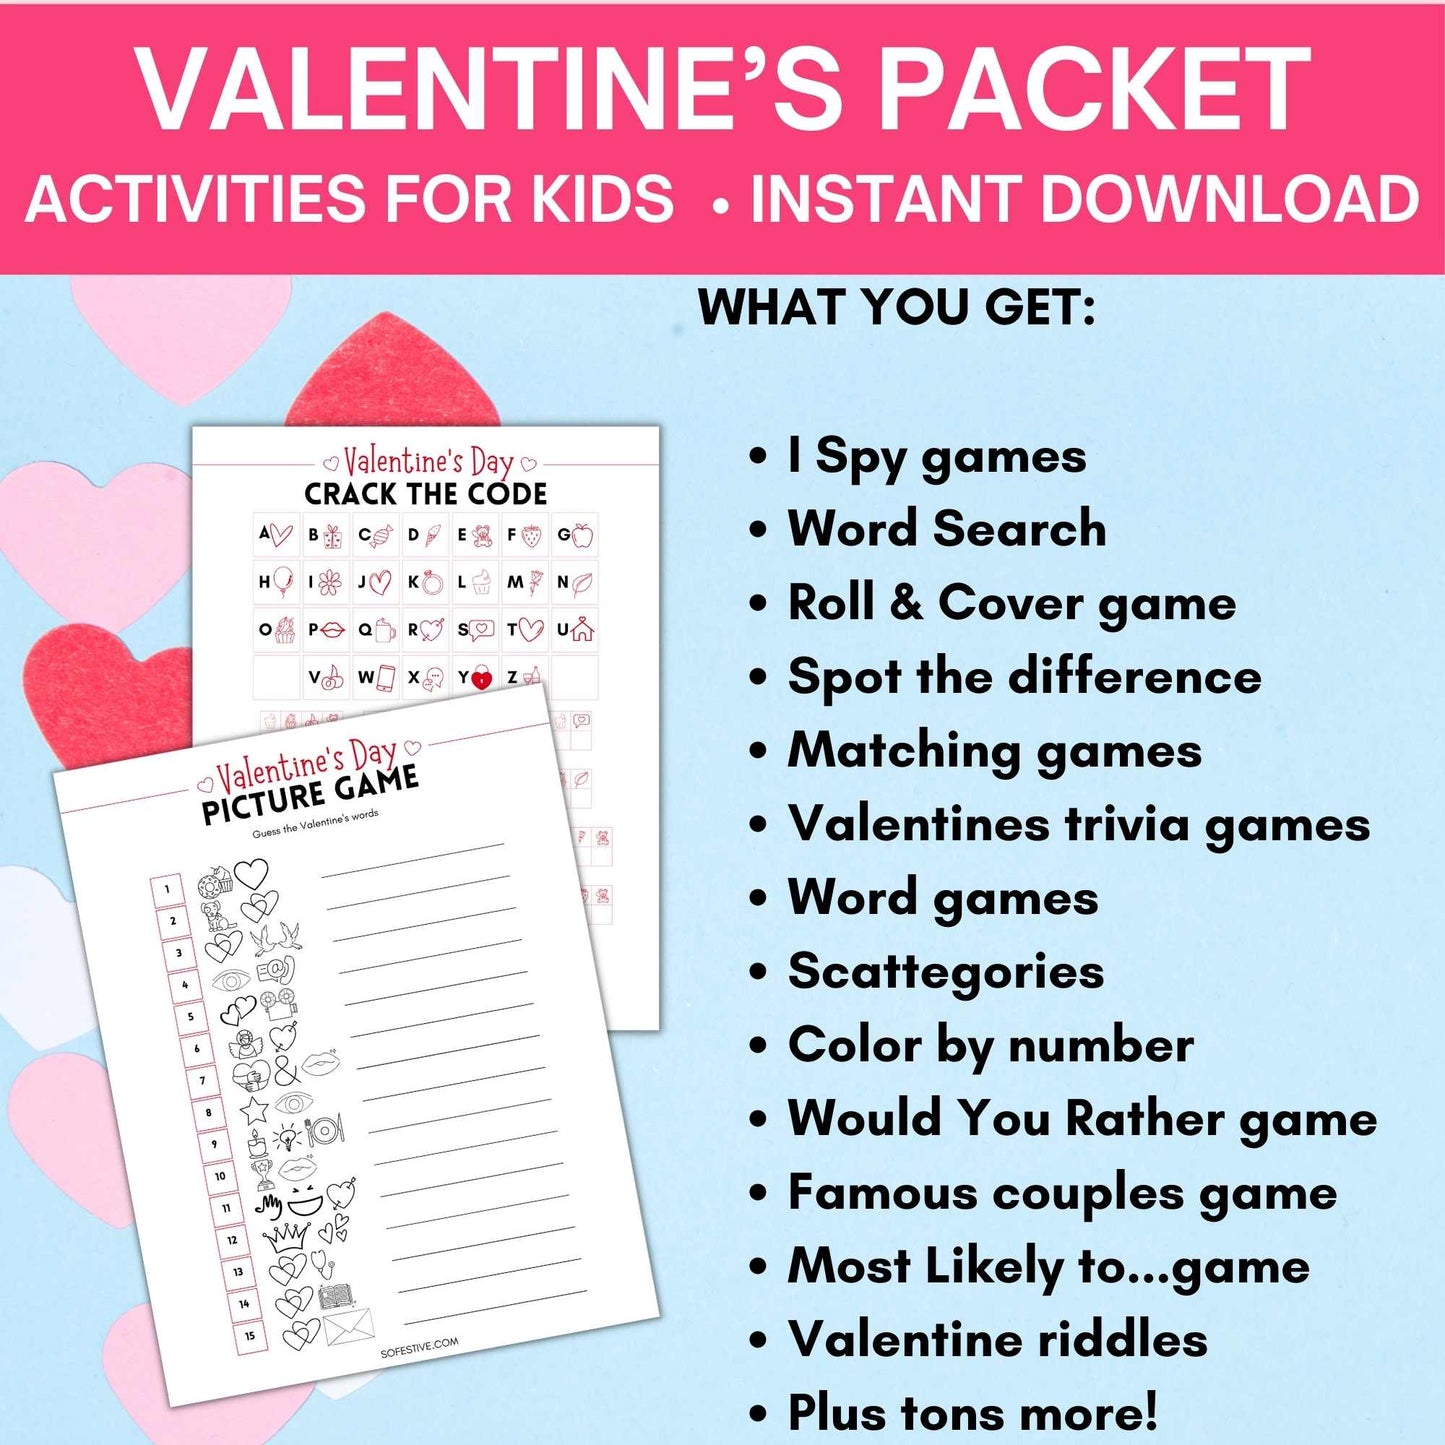 55-Page Valentine's Day Packet- Printable Games & Activity Sheets